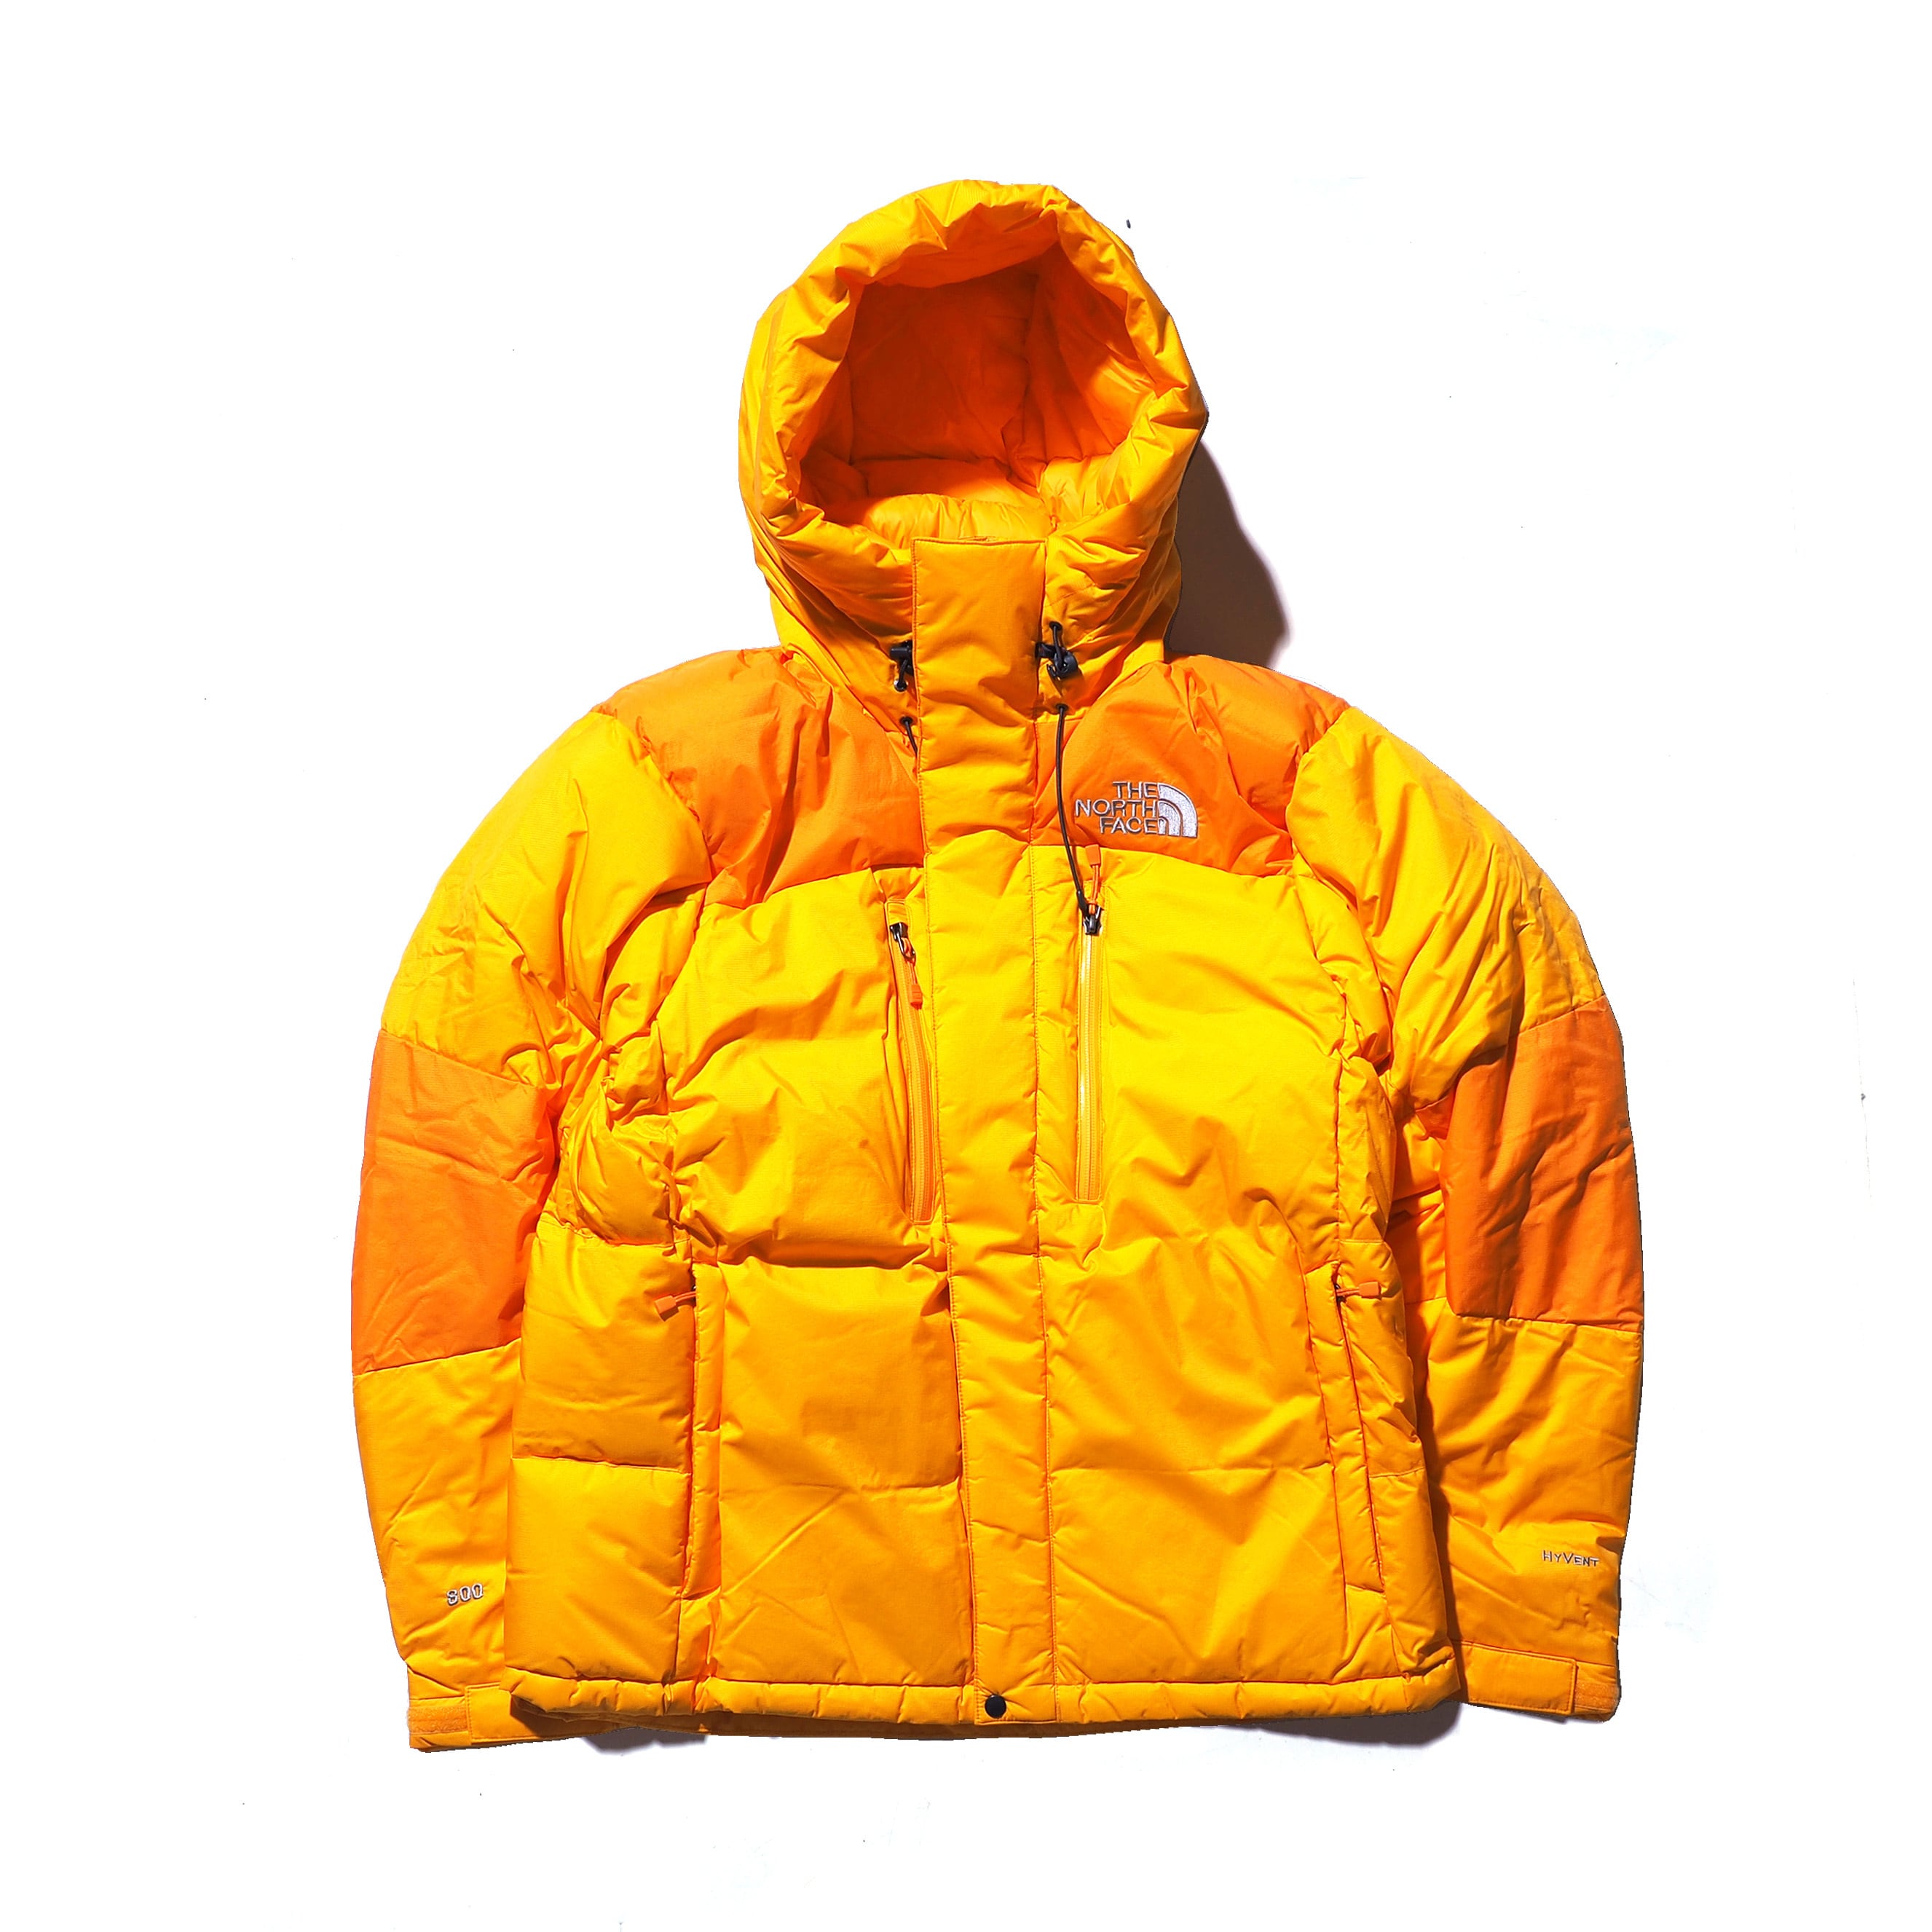 THE NORTH FACE PRISM DOWN JACKET ”YELLOW” TYPE-HYVENT | bassandme webshop